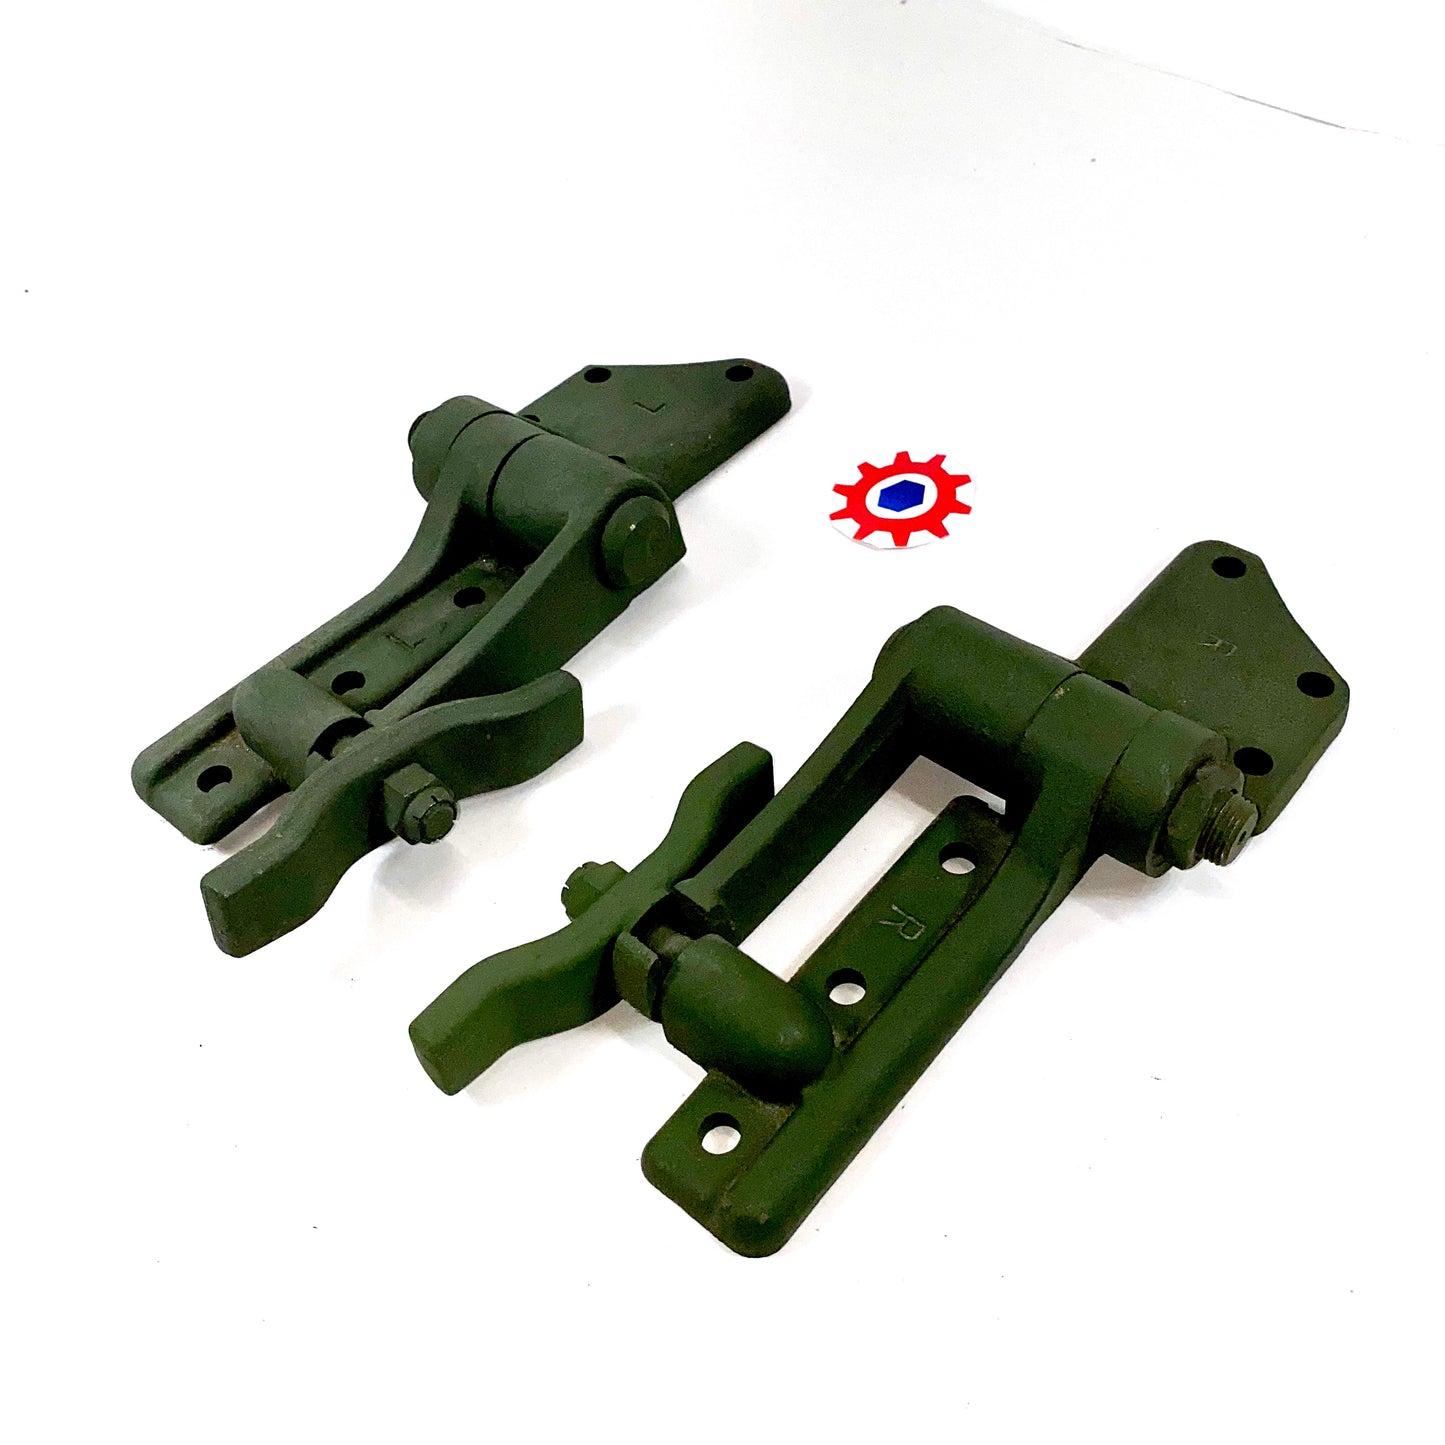 1 Set = LH & RH - WINDSHIELD HINGES, OUTER ; 5Ton or 2.5Ton ; 7373321 & 7373322